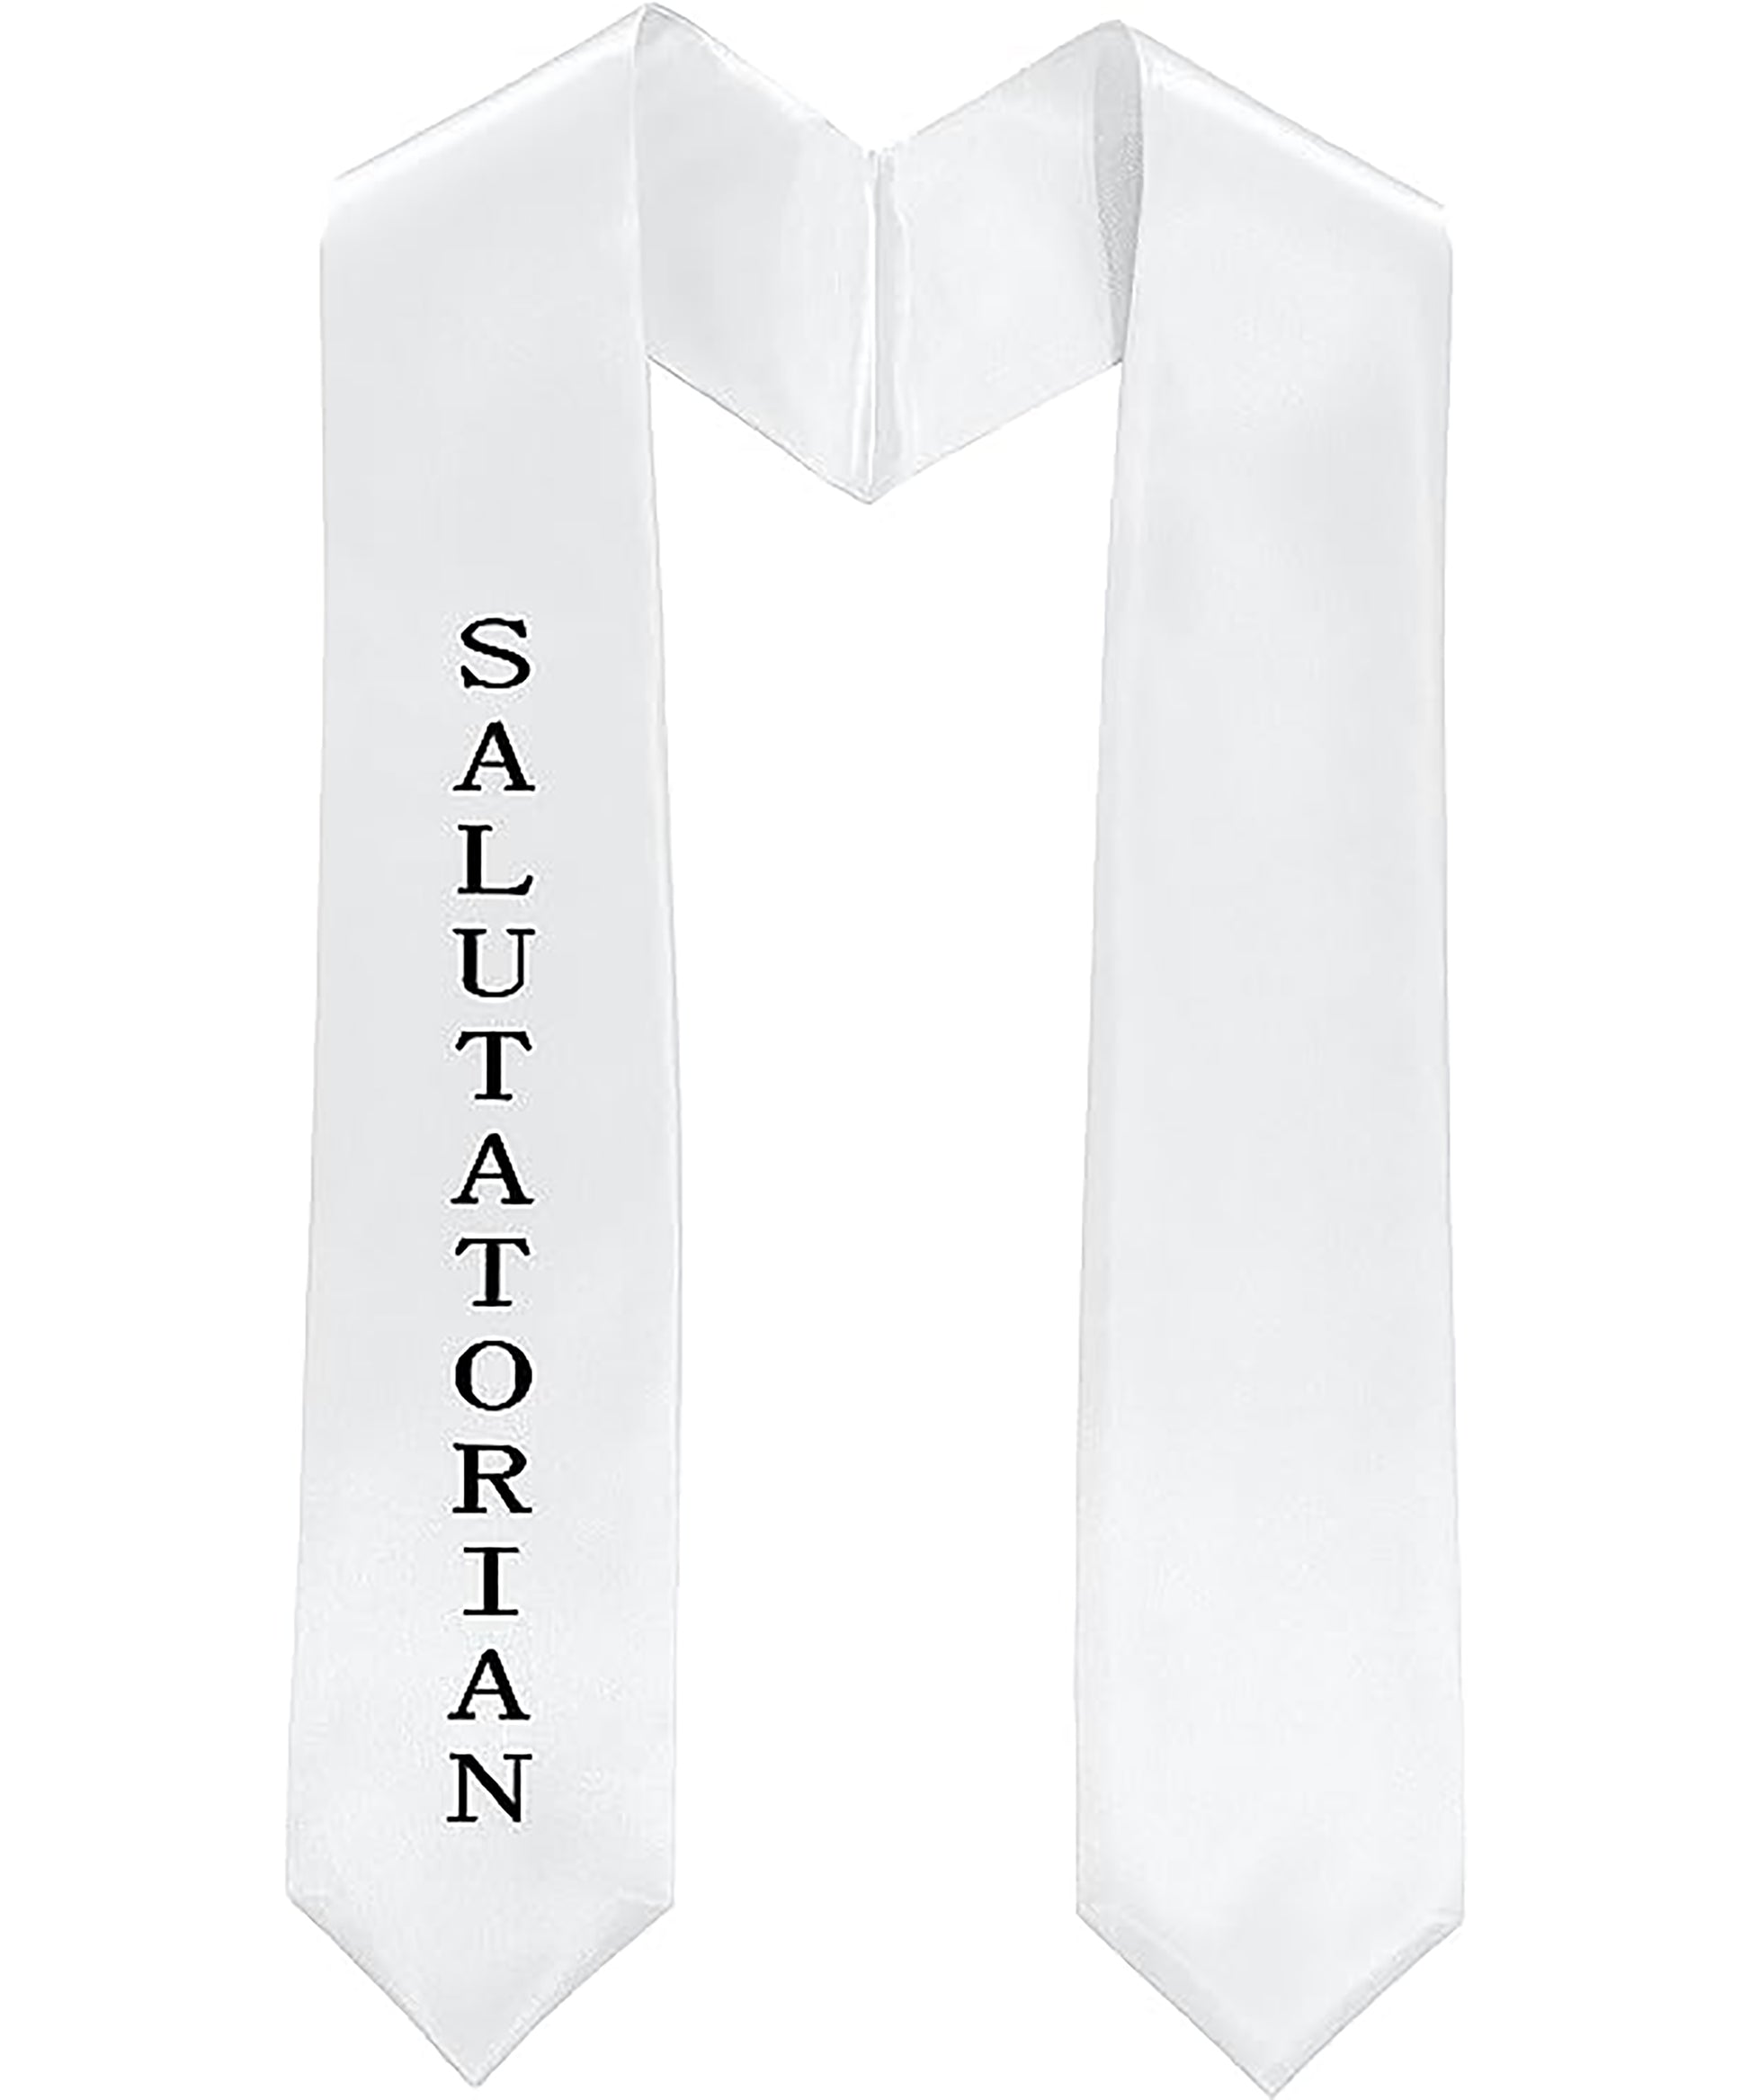 Adult Embroidery Graduation Stoles and Sashes in Various Colors